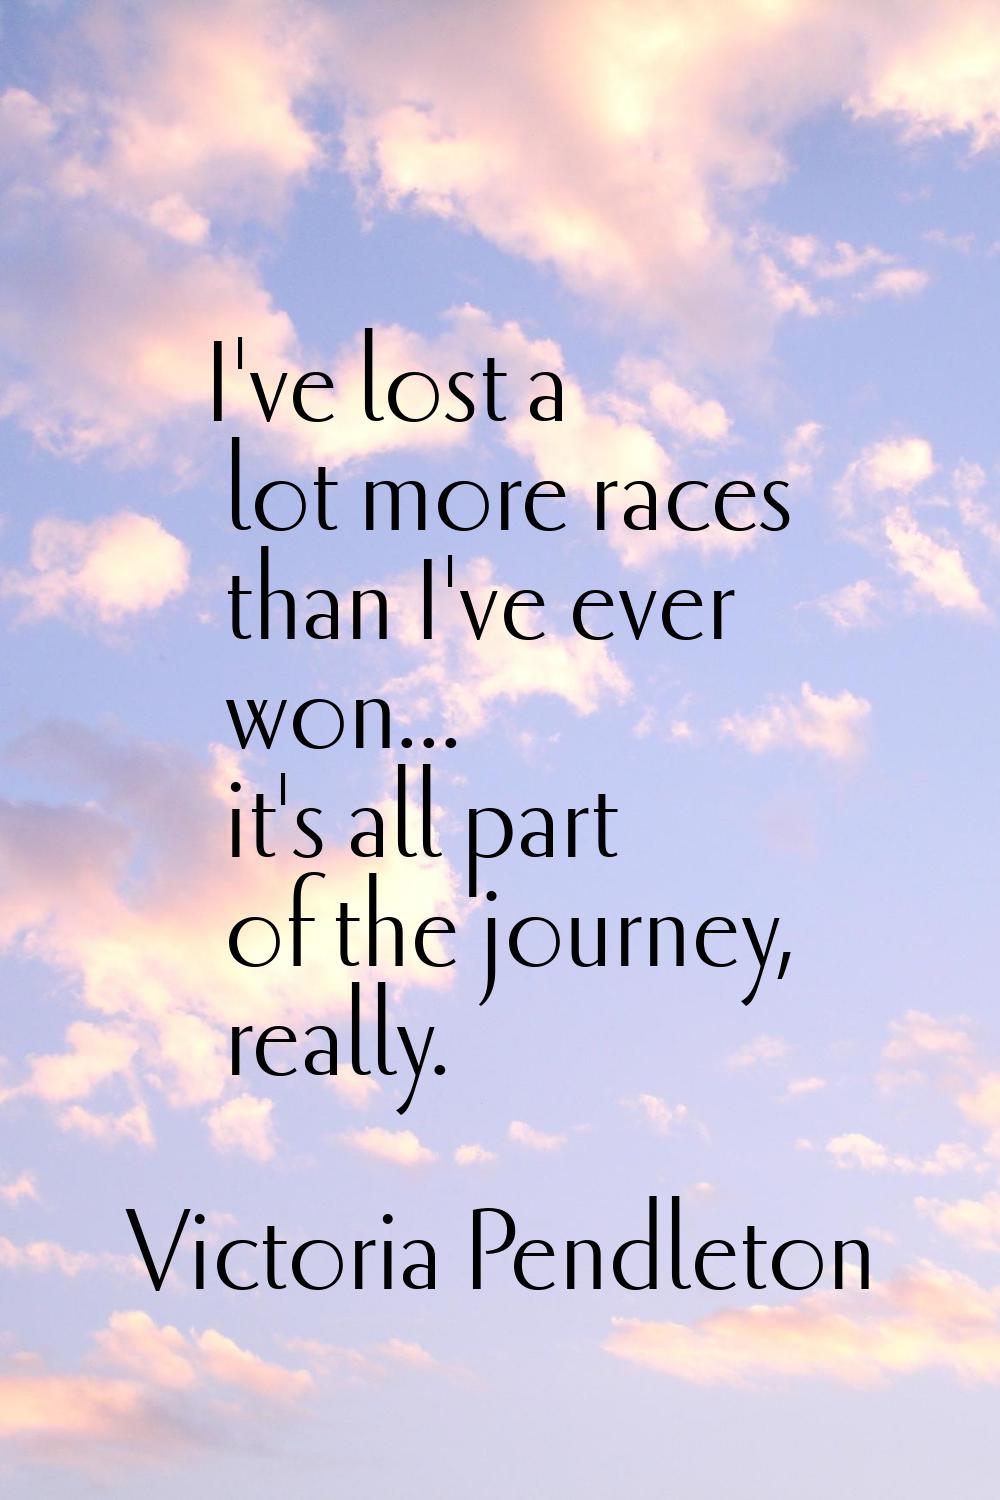 I've lost a lot more races than I've ever won... it's all part of the journey, really.